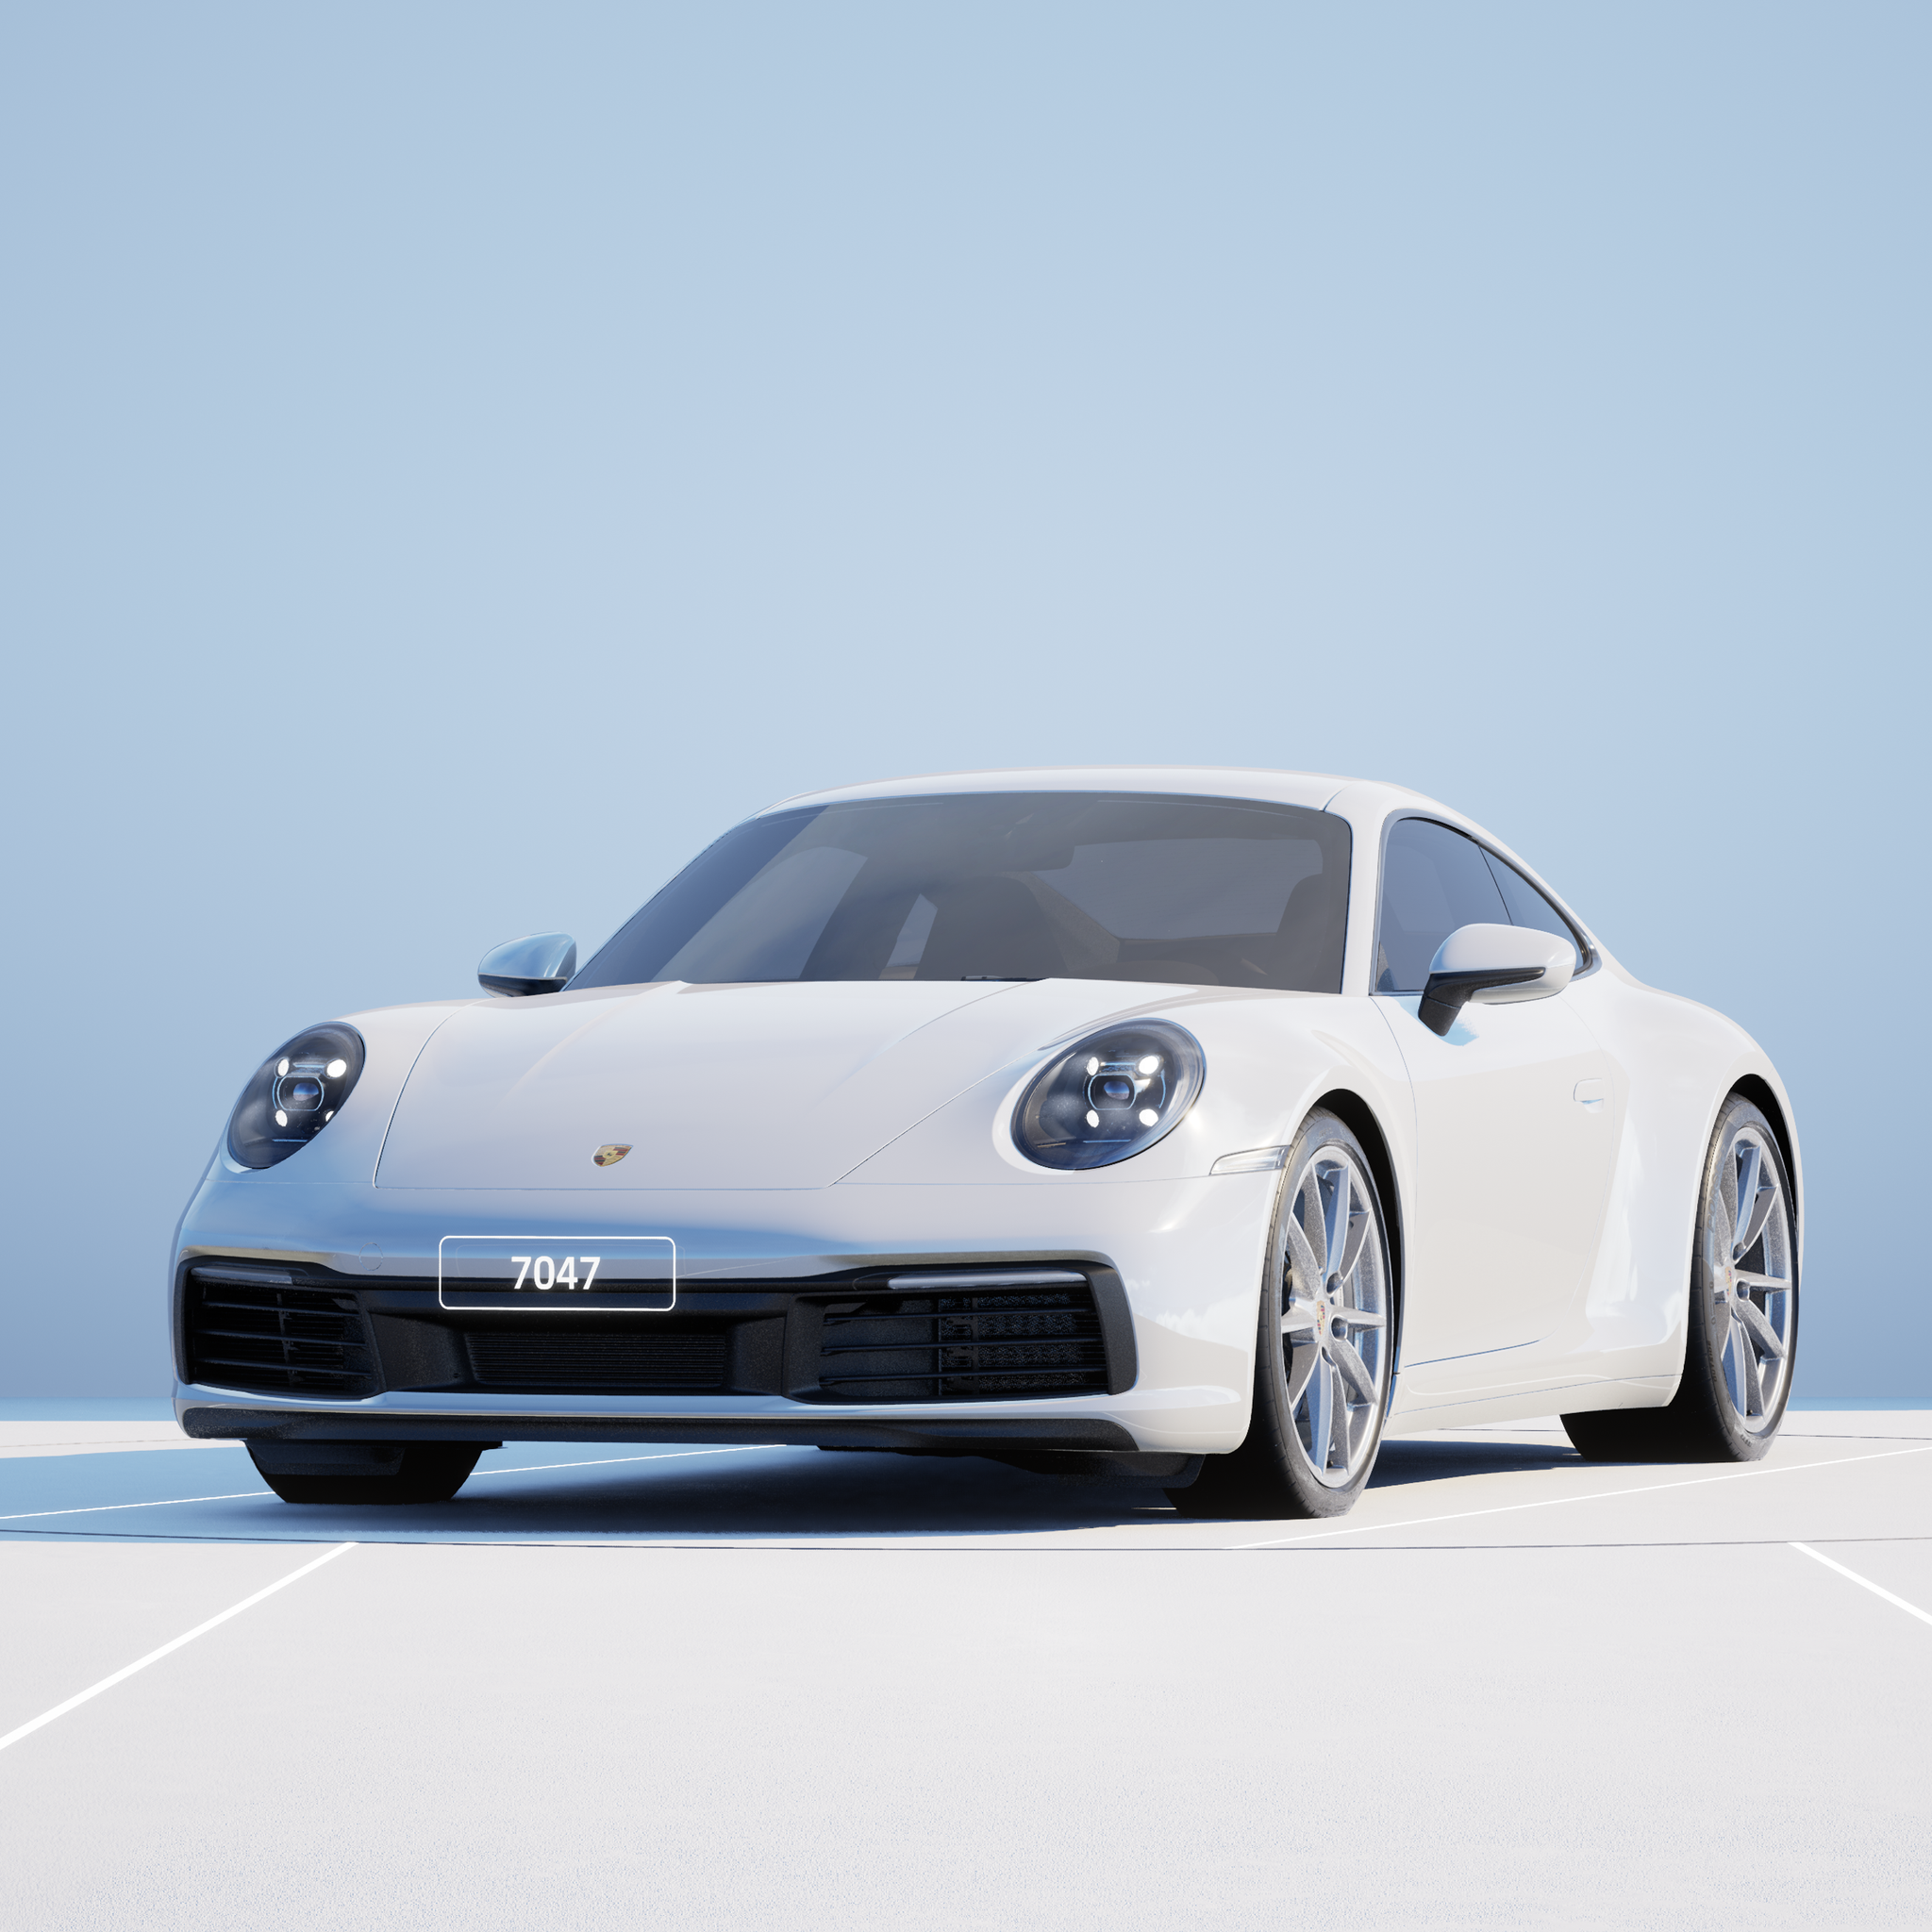 The PORSCHΞ 911 7047 image in phase